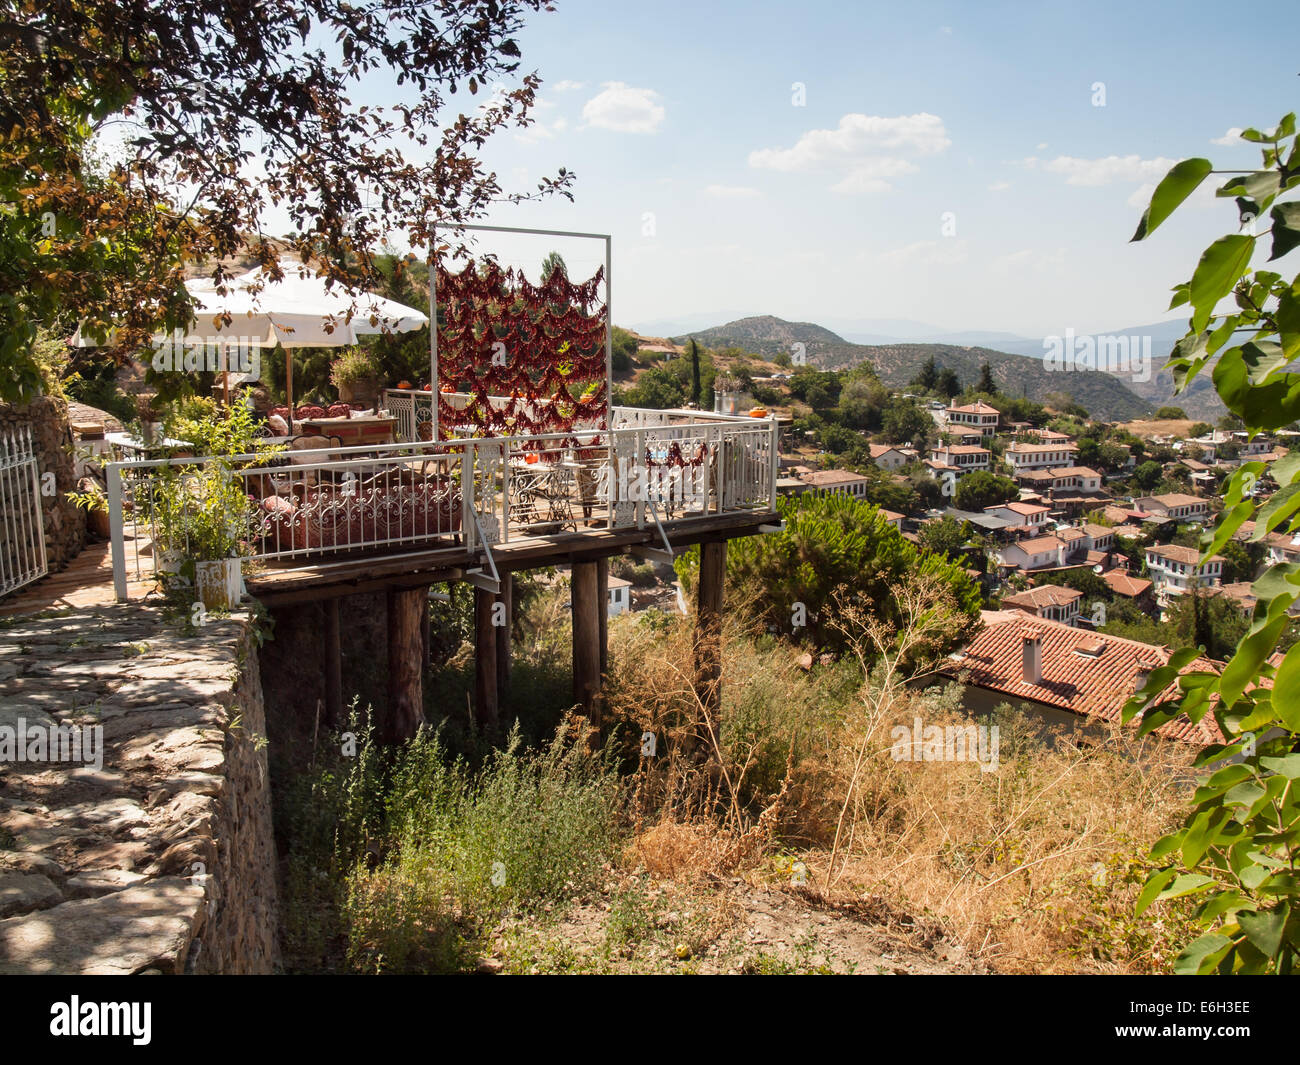 view over  the turkish village of sirince in izmir province with garden terrace in the foreground Stock Photo